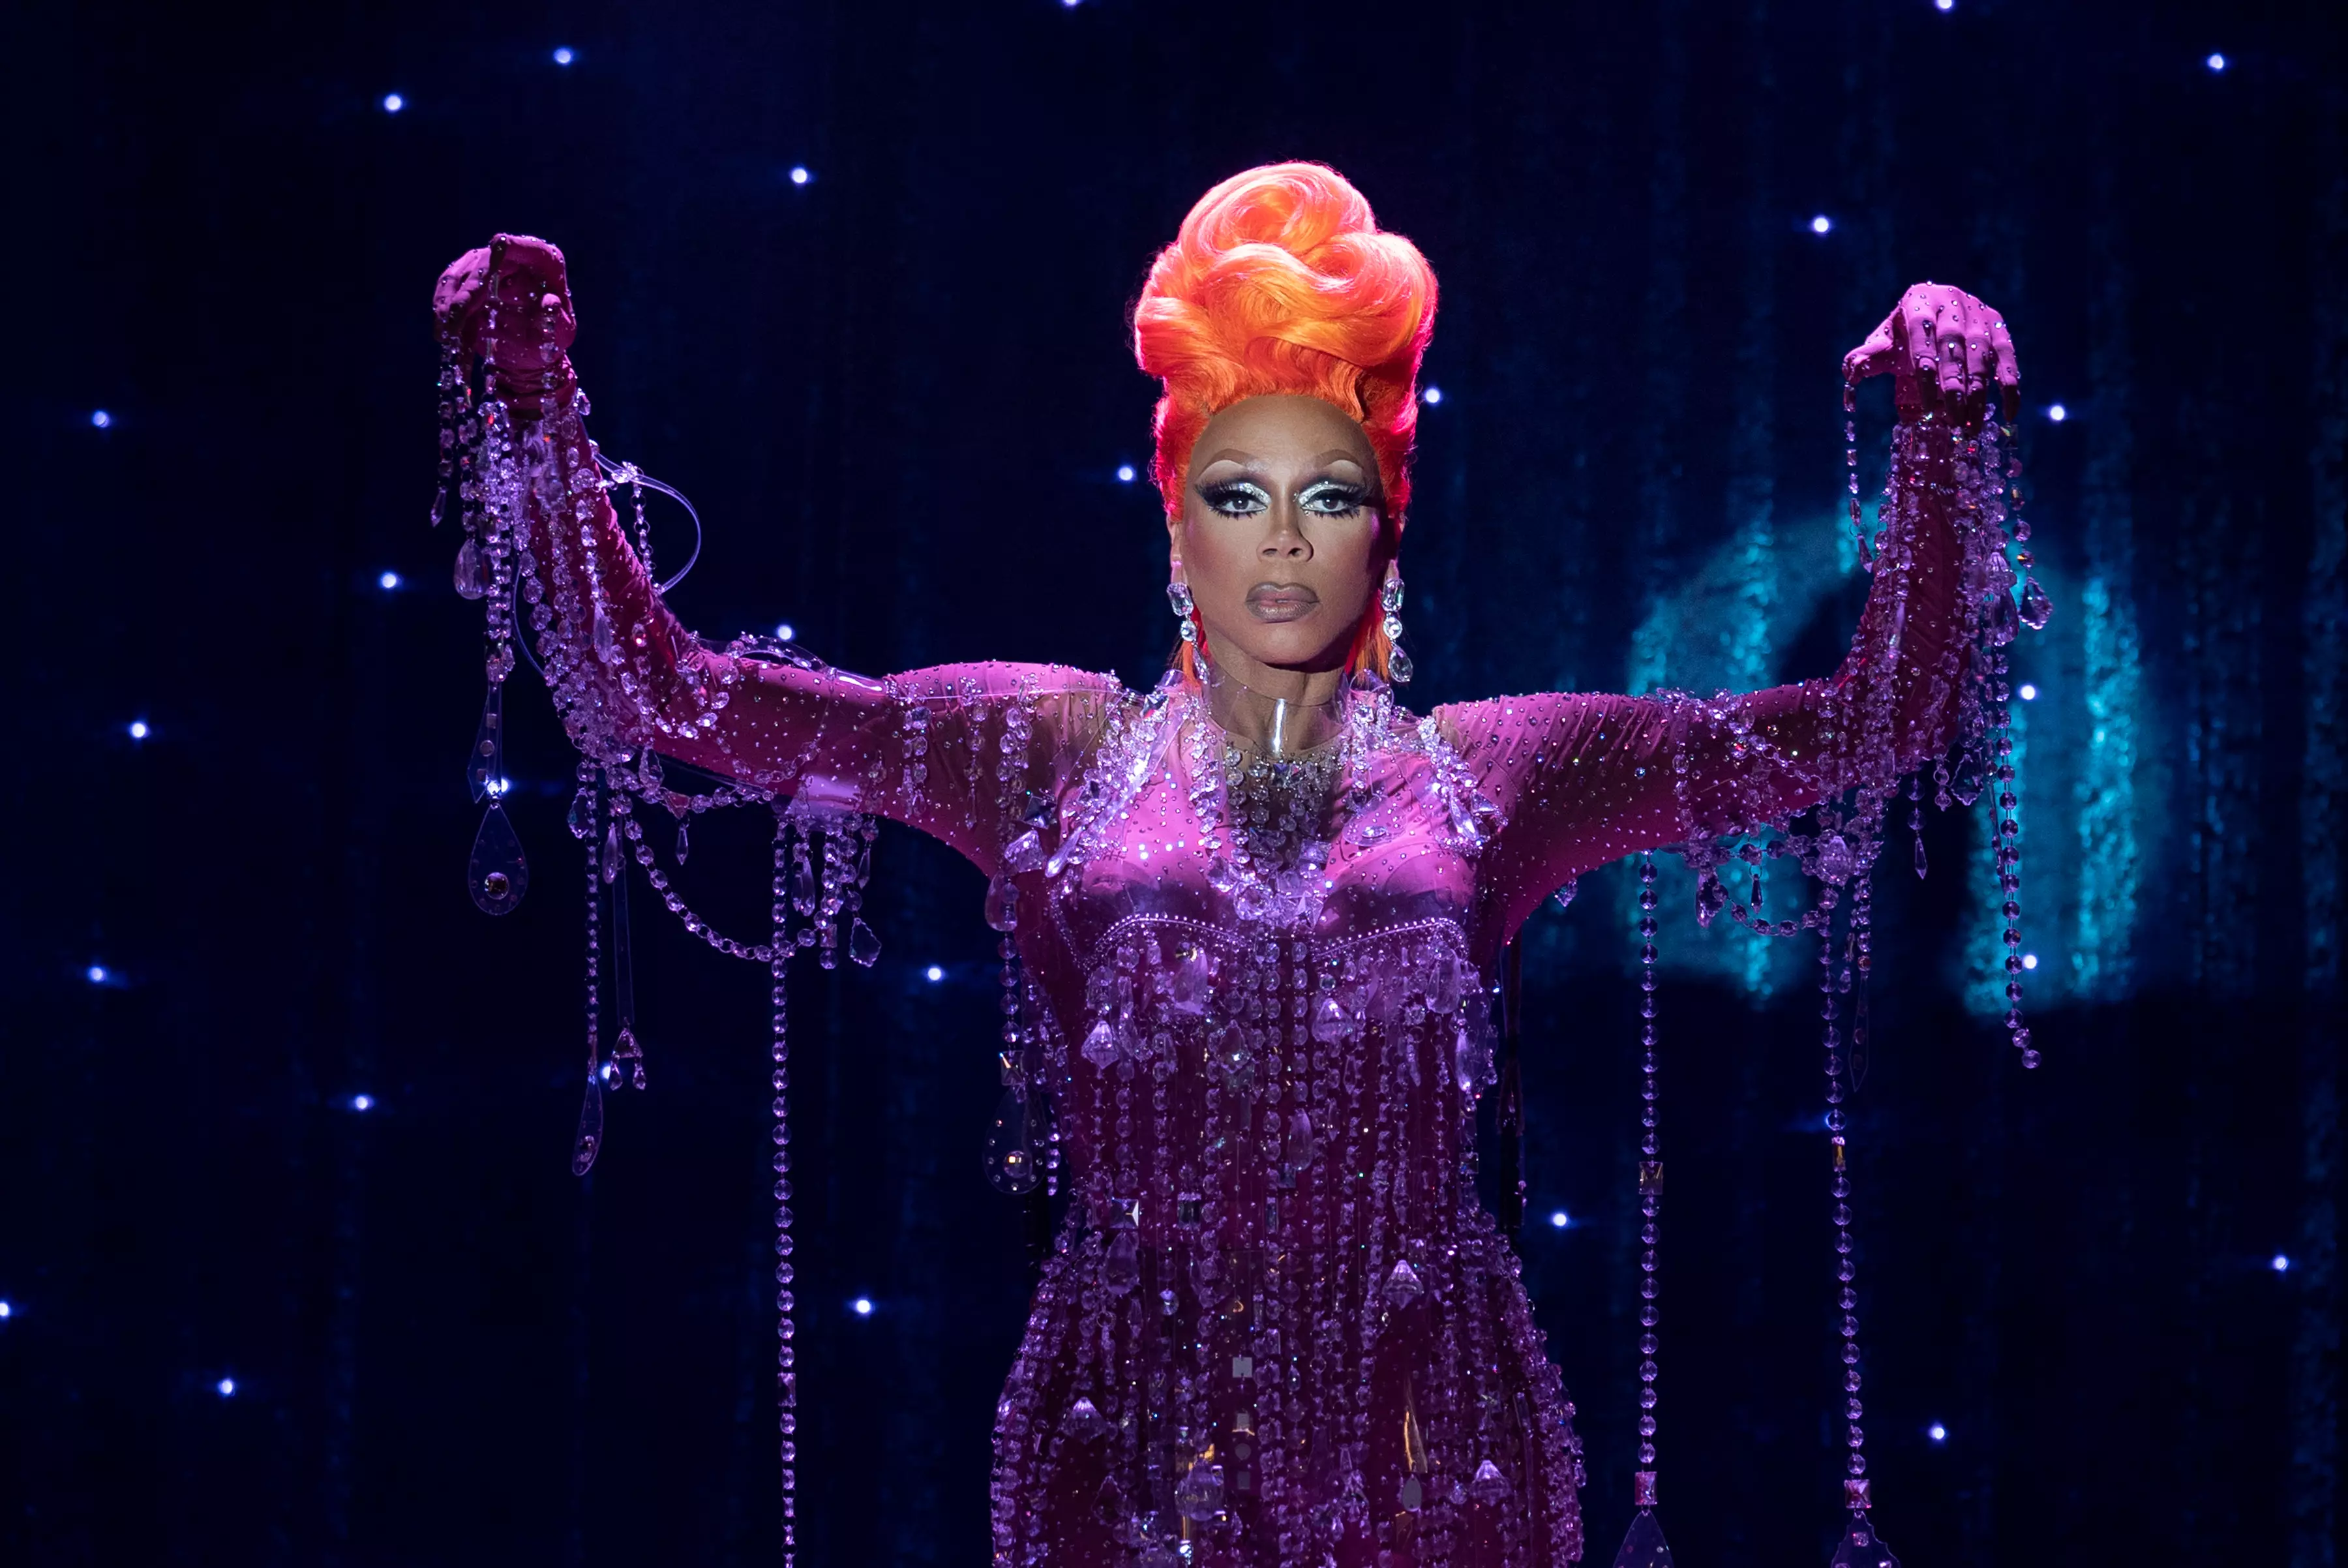 The Emmy Award-winner's new show sees the introduction of Ruby Red, played by RuPaul. (